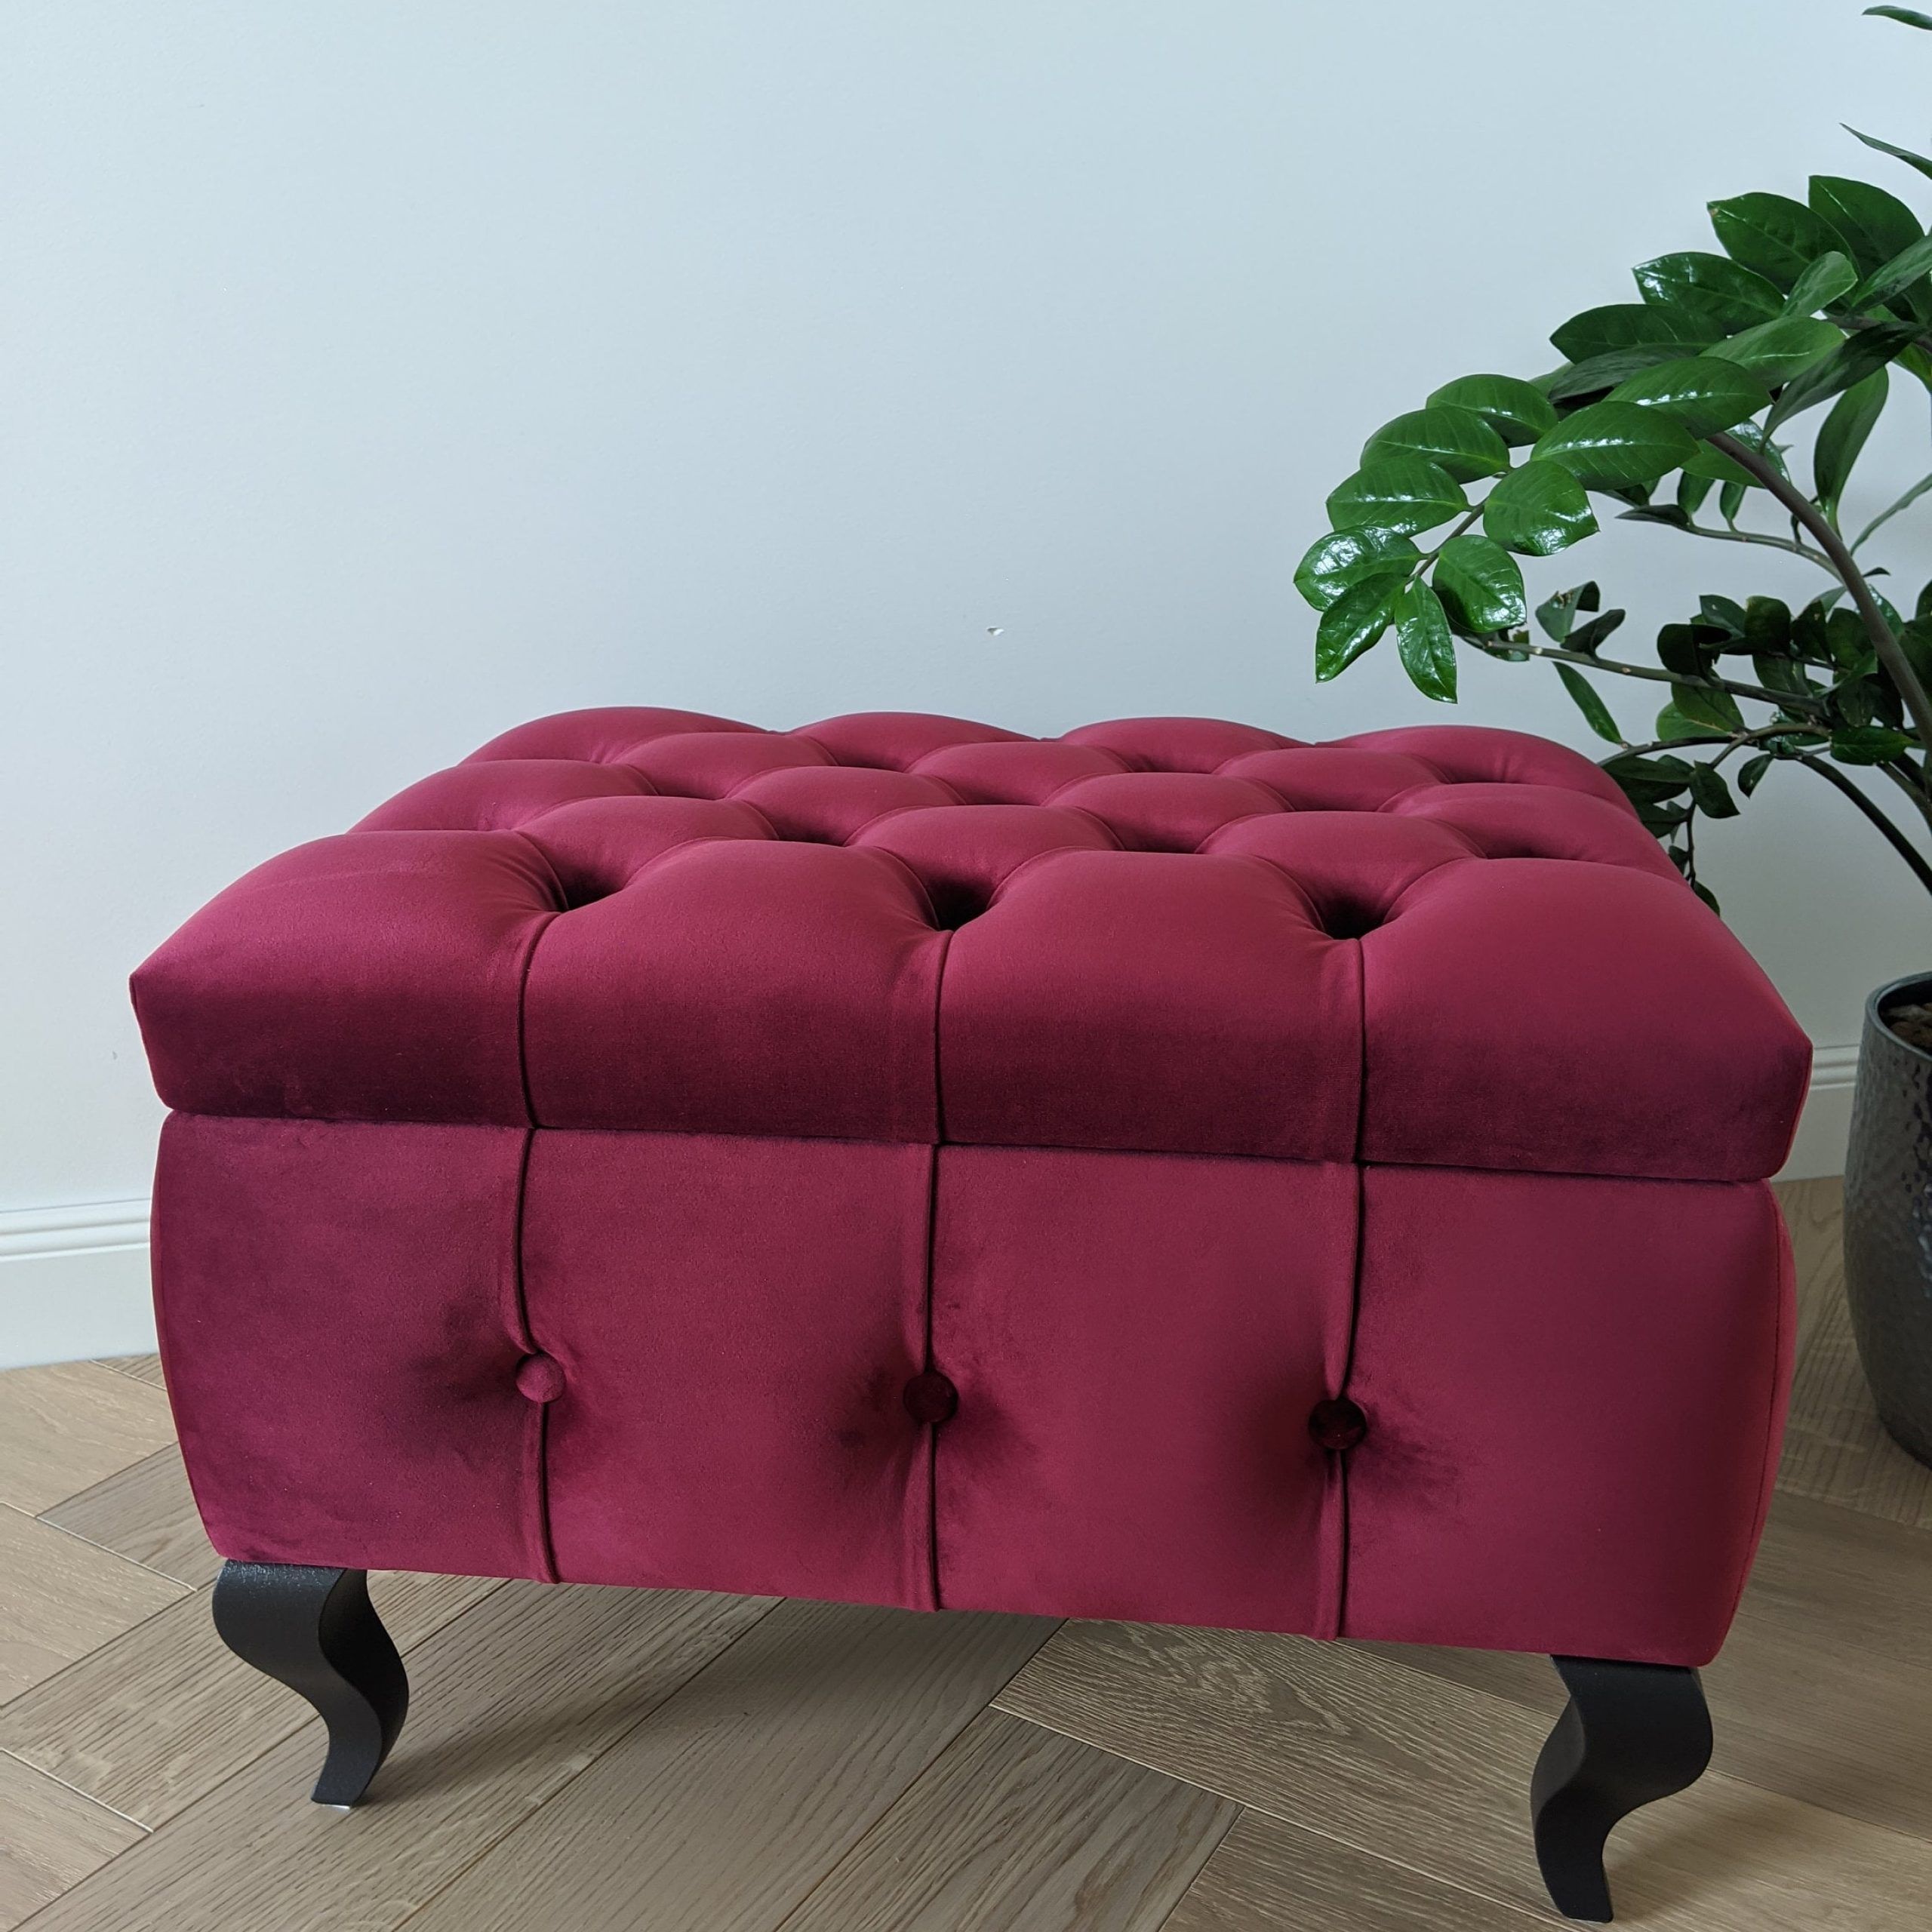 Burgundy Red Velvet Ottoman With Storage Box Ottoman Pouf – Etsy Sweden For Burgundy Ottomans (View 15 of 15)